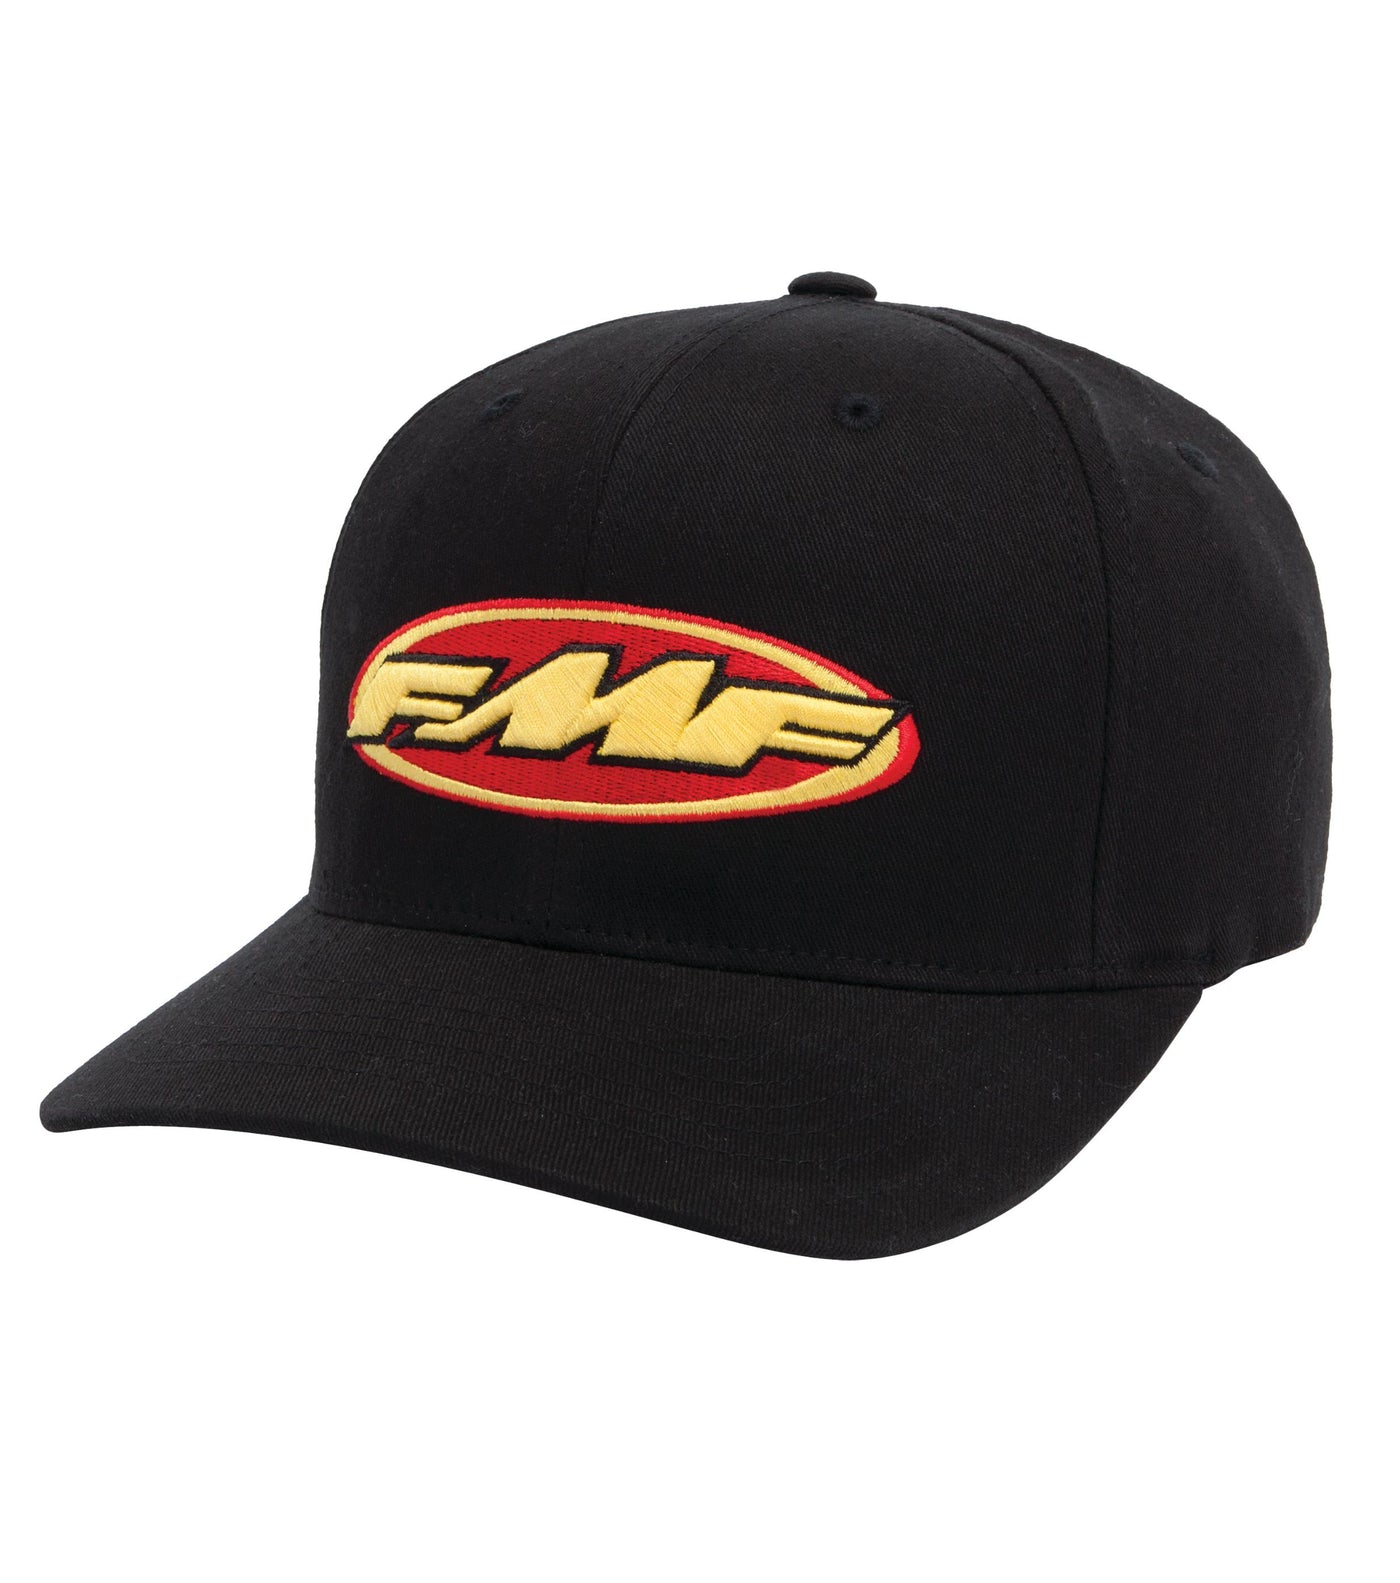 Don 2 Hat Charcoal Sm/md